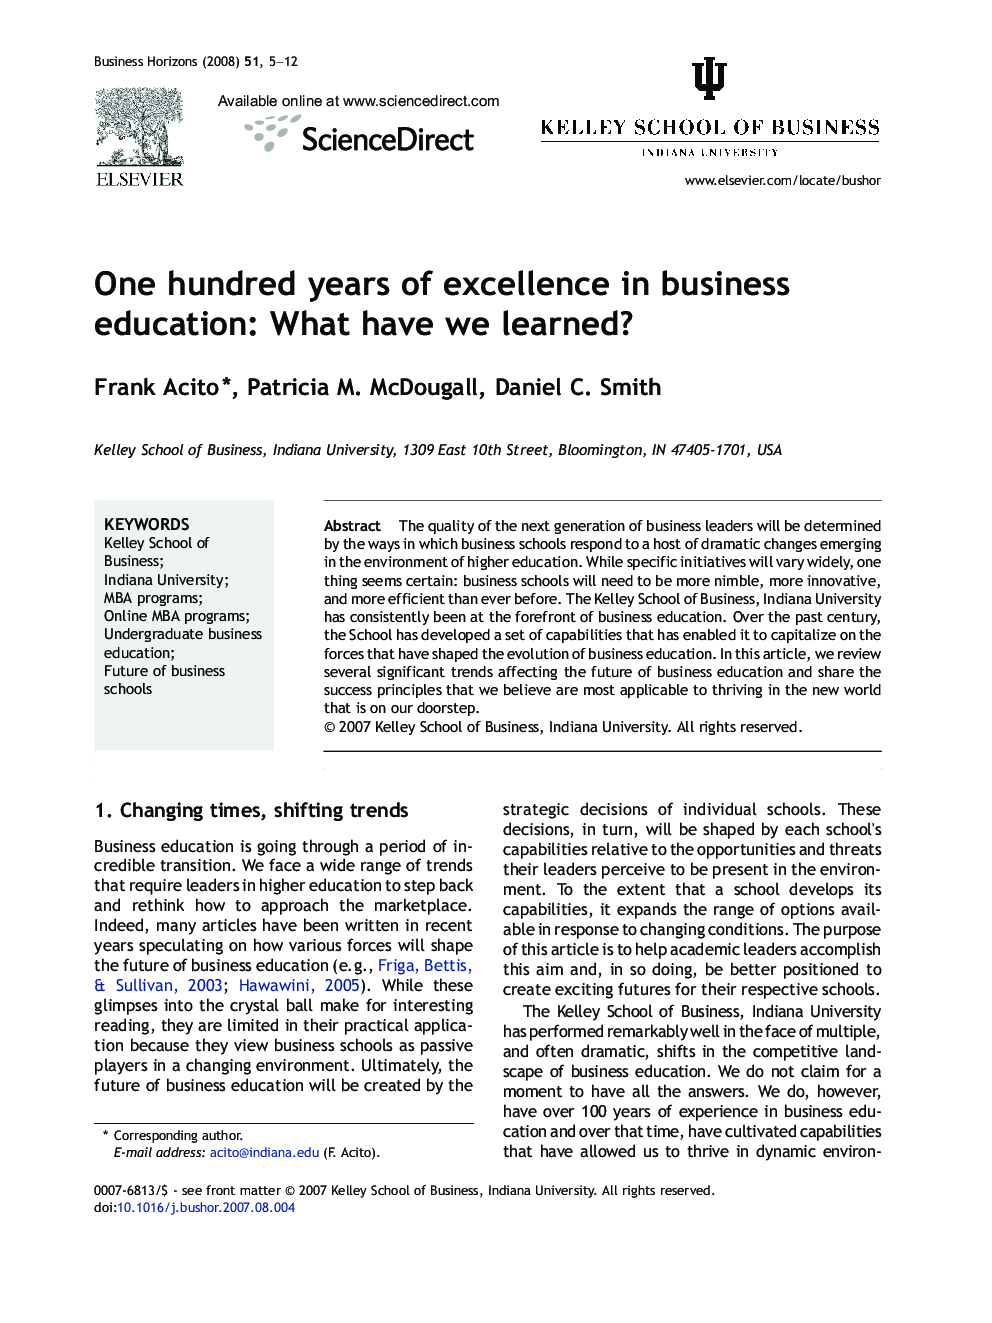 One hundred years of excellence in business education: What have we learned?